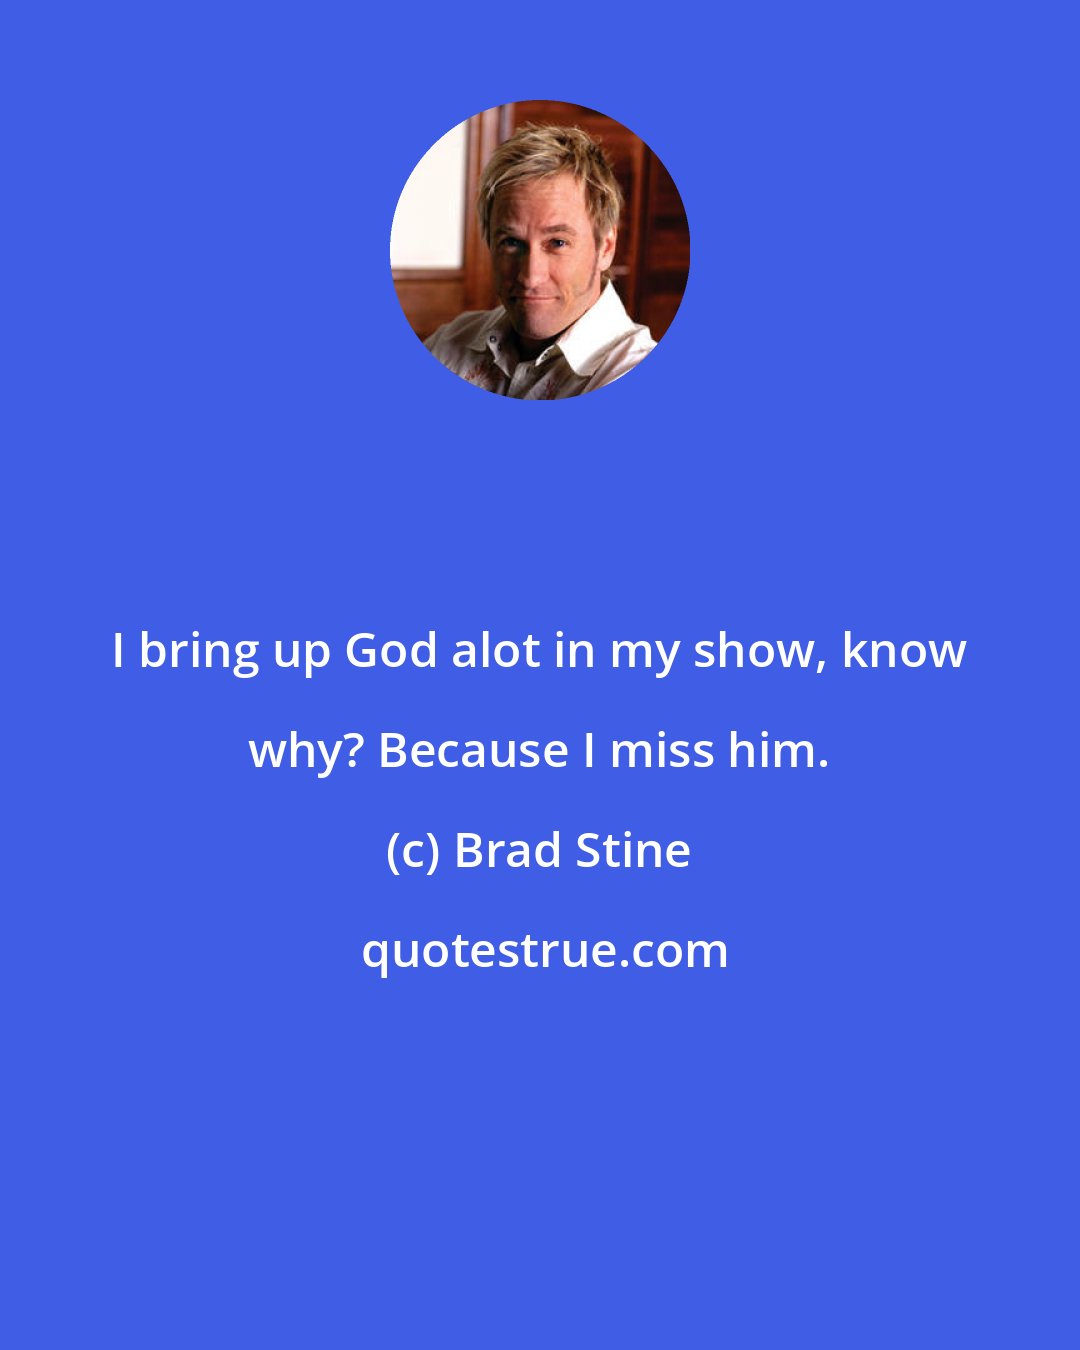 Brad Stine: I bring up God alot in my show, know why? Because I miss him.